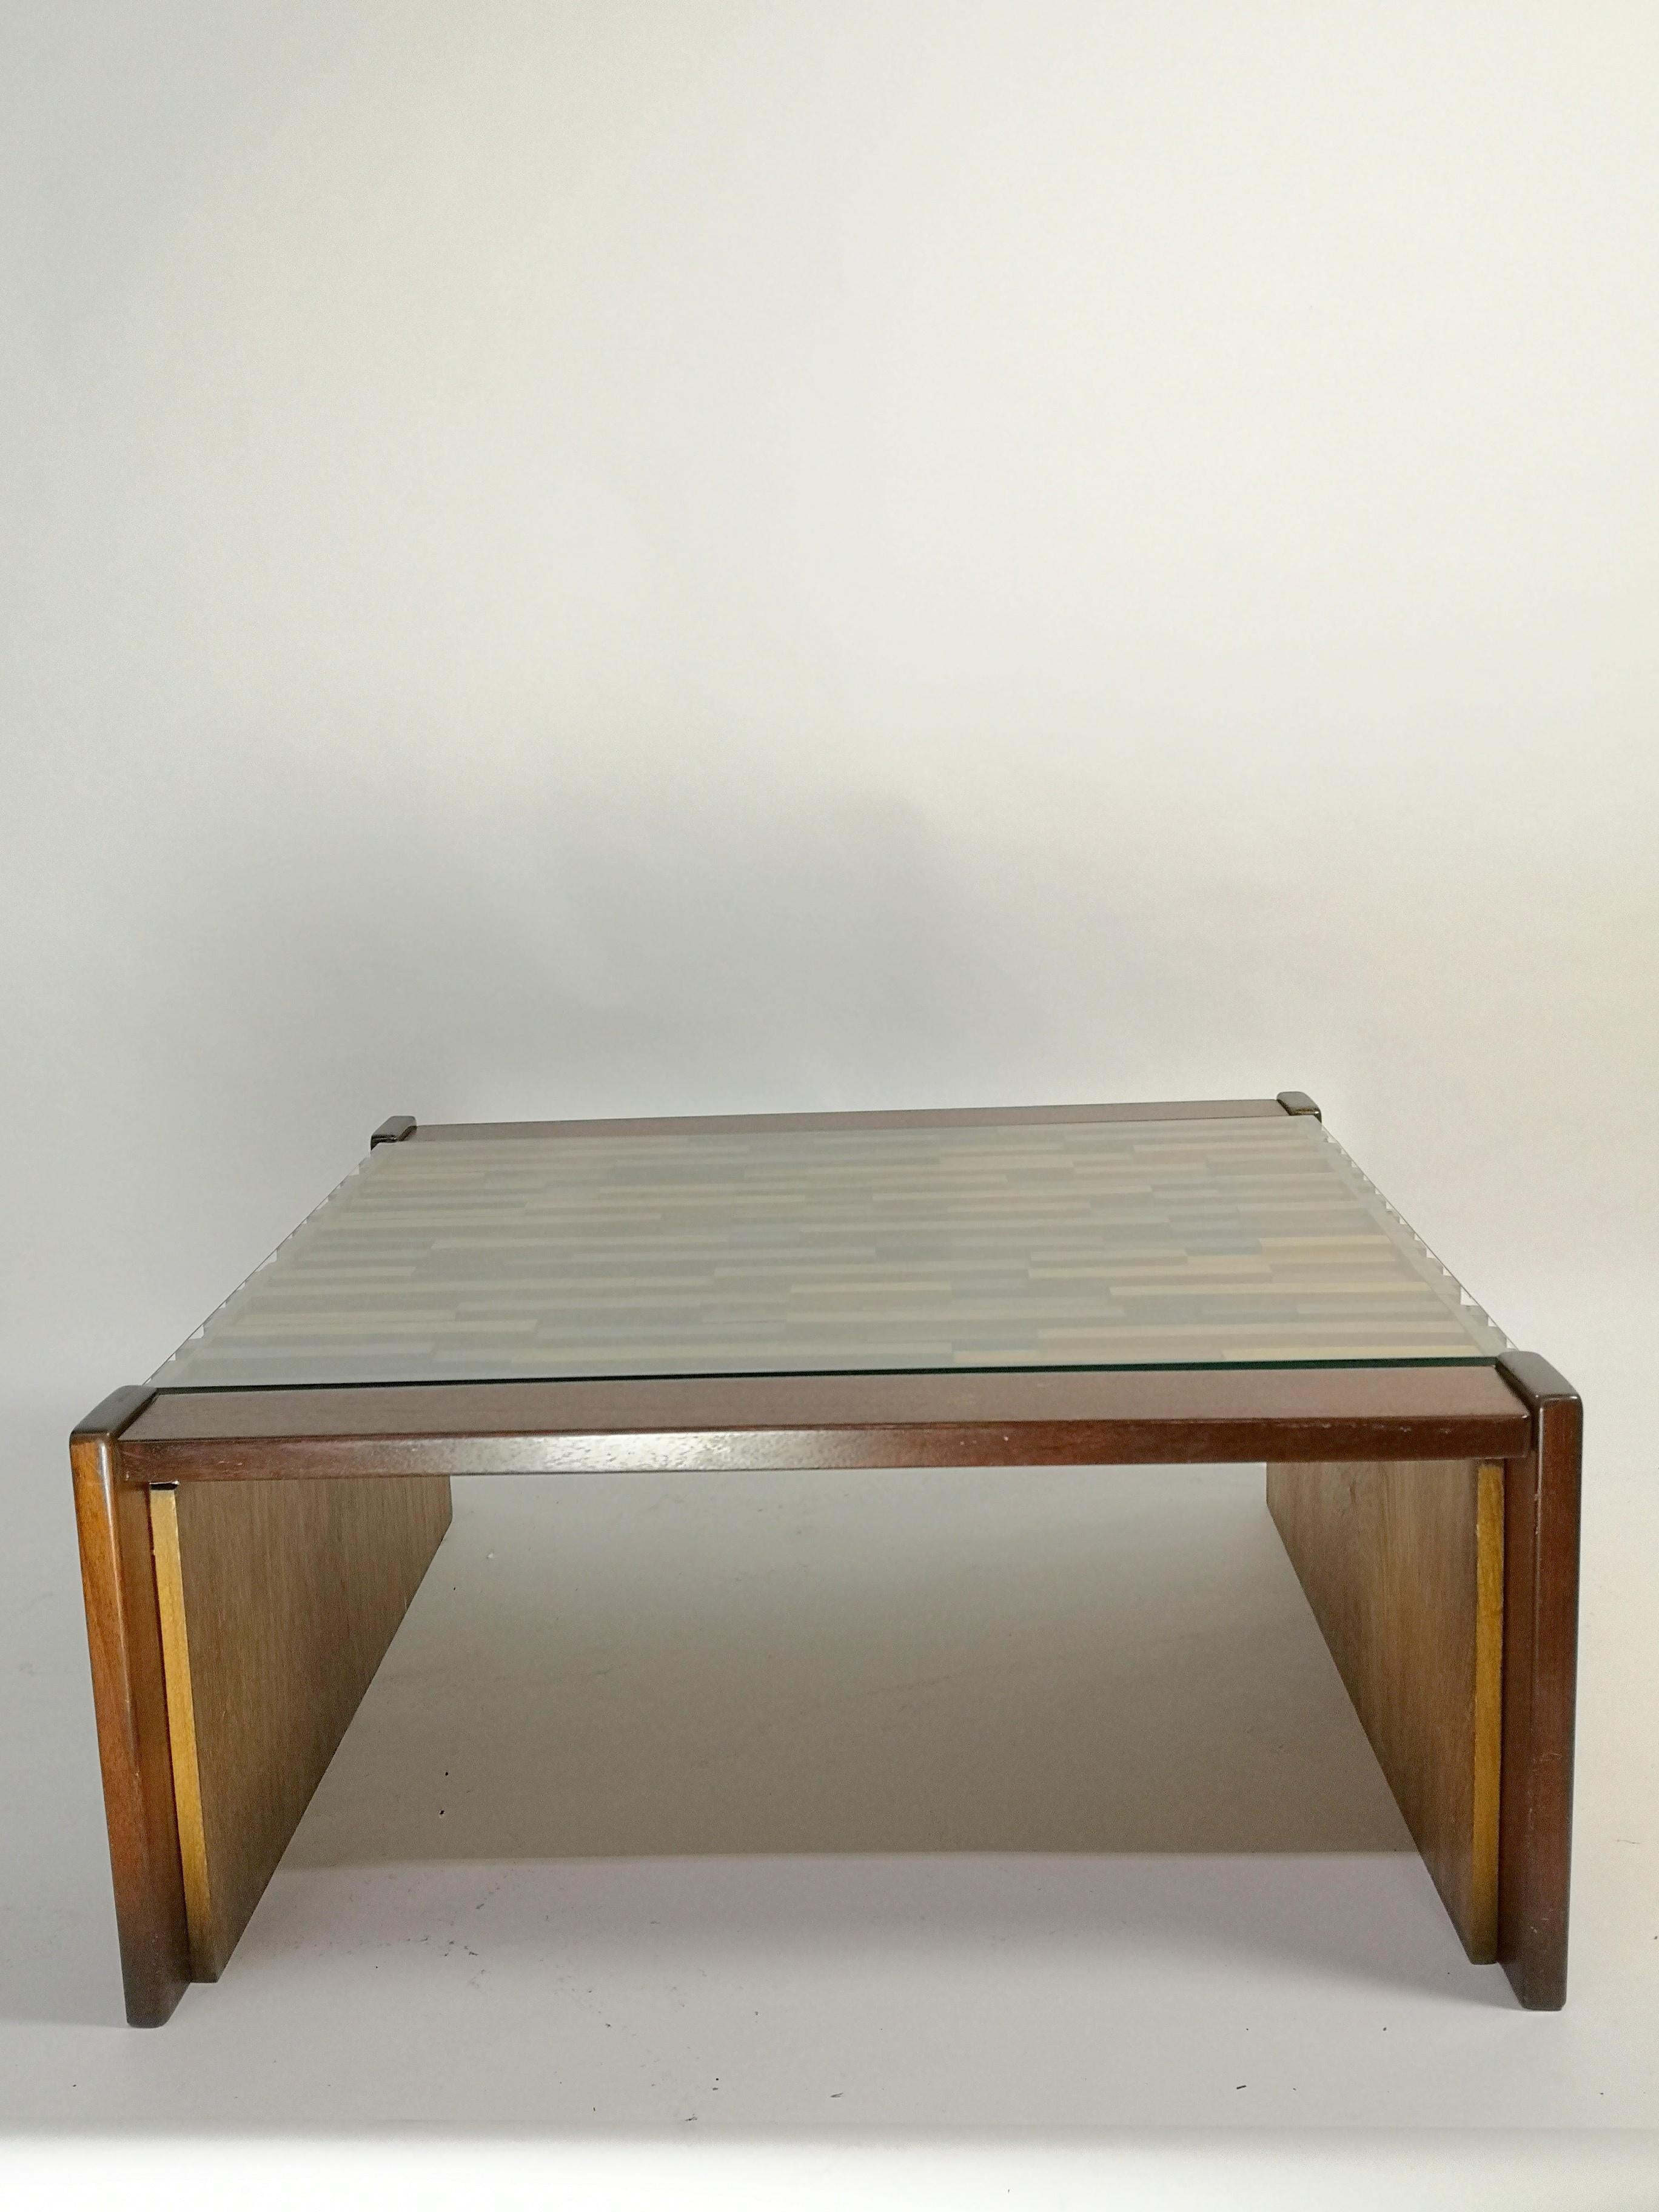 Designed by Percival Lafer, this table is marked and manufactured in Brazil during the 1960s. The table made of rosewood, teak, and jacaranda. It has a thick glass top the table is in original condition, with some minor surface damage, otherwise